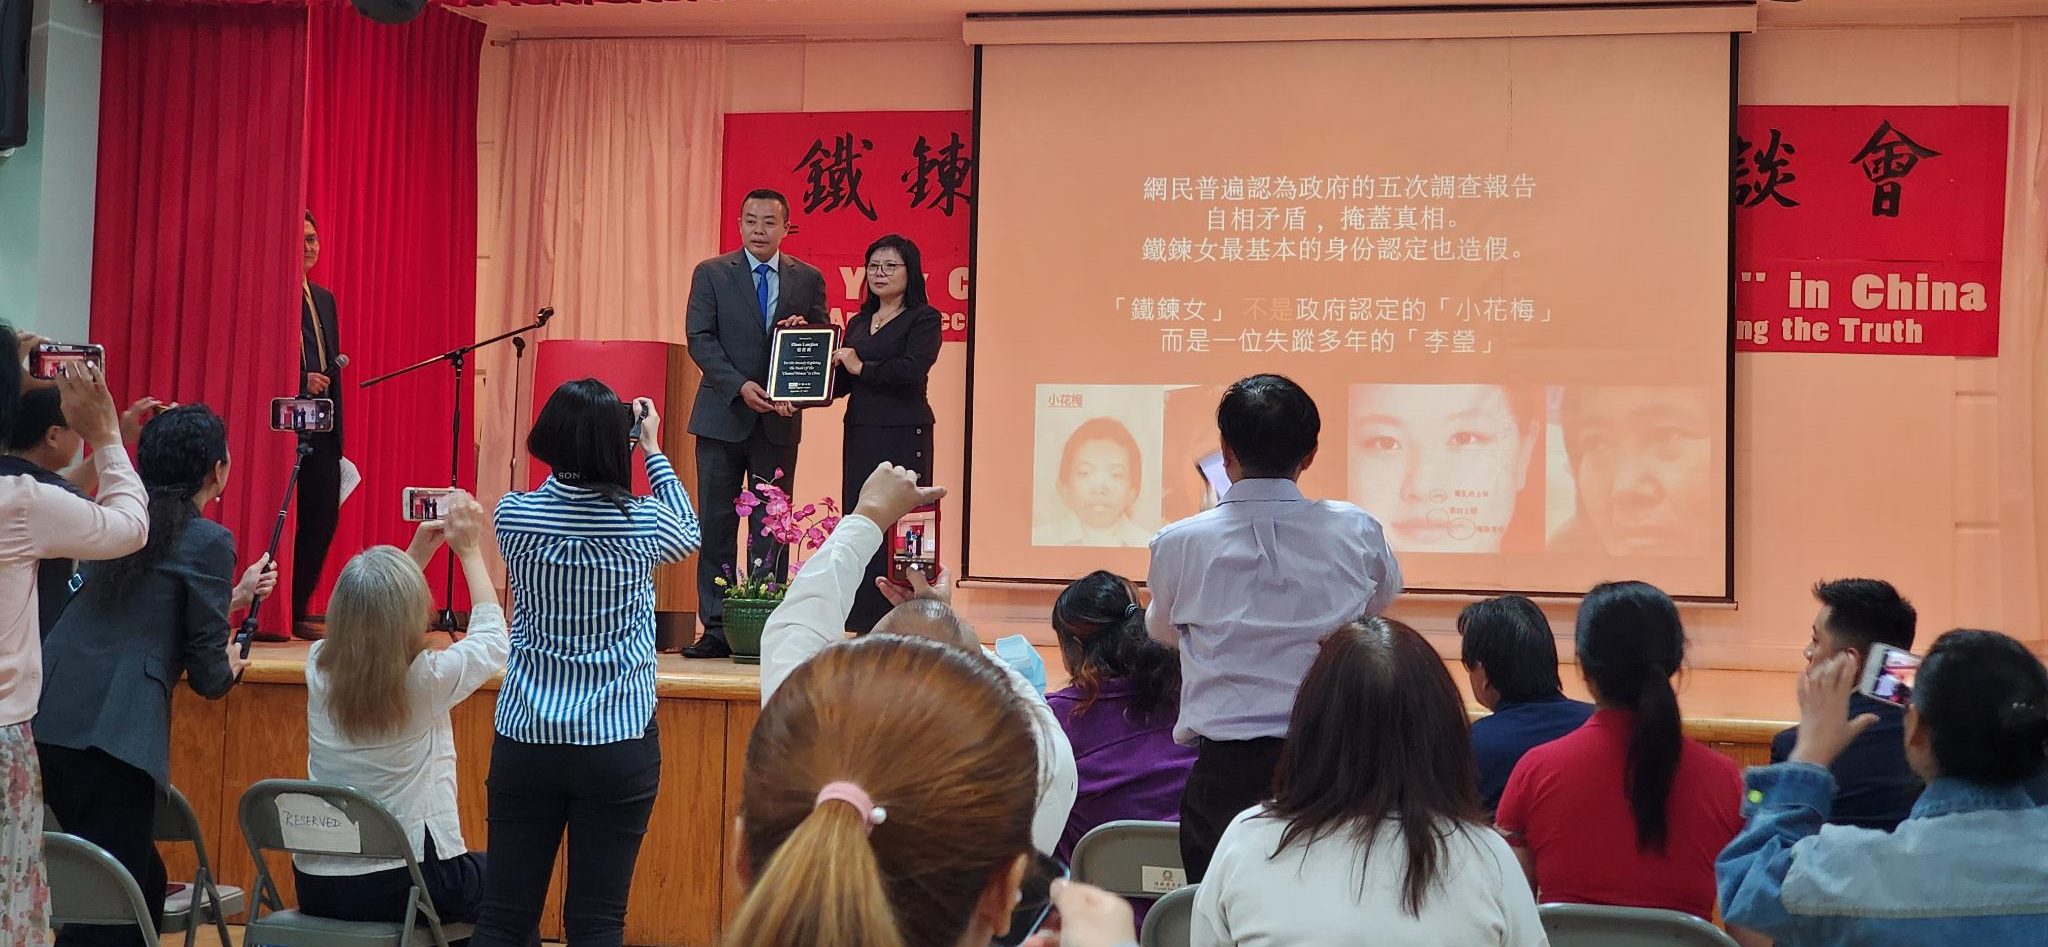 WRIC Honors Journalist Zhao Lanjian for Bravely Exploring the Truth